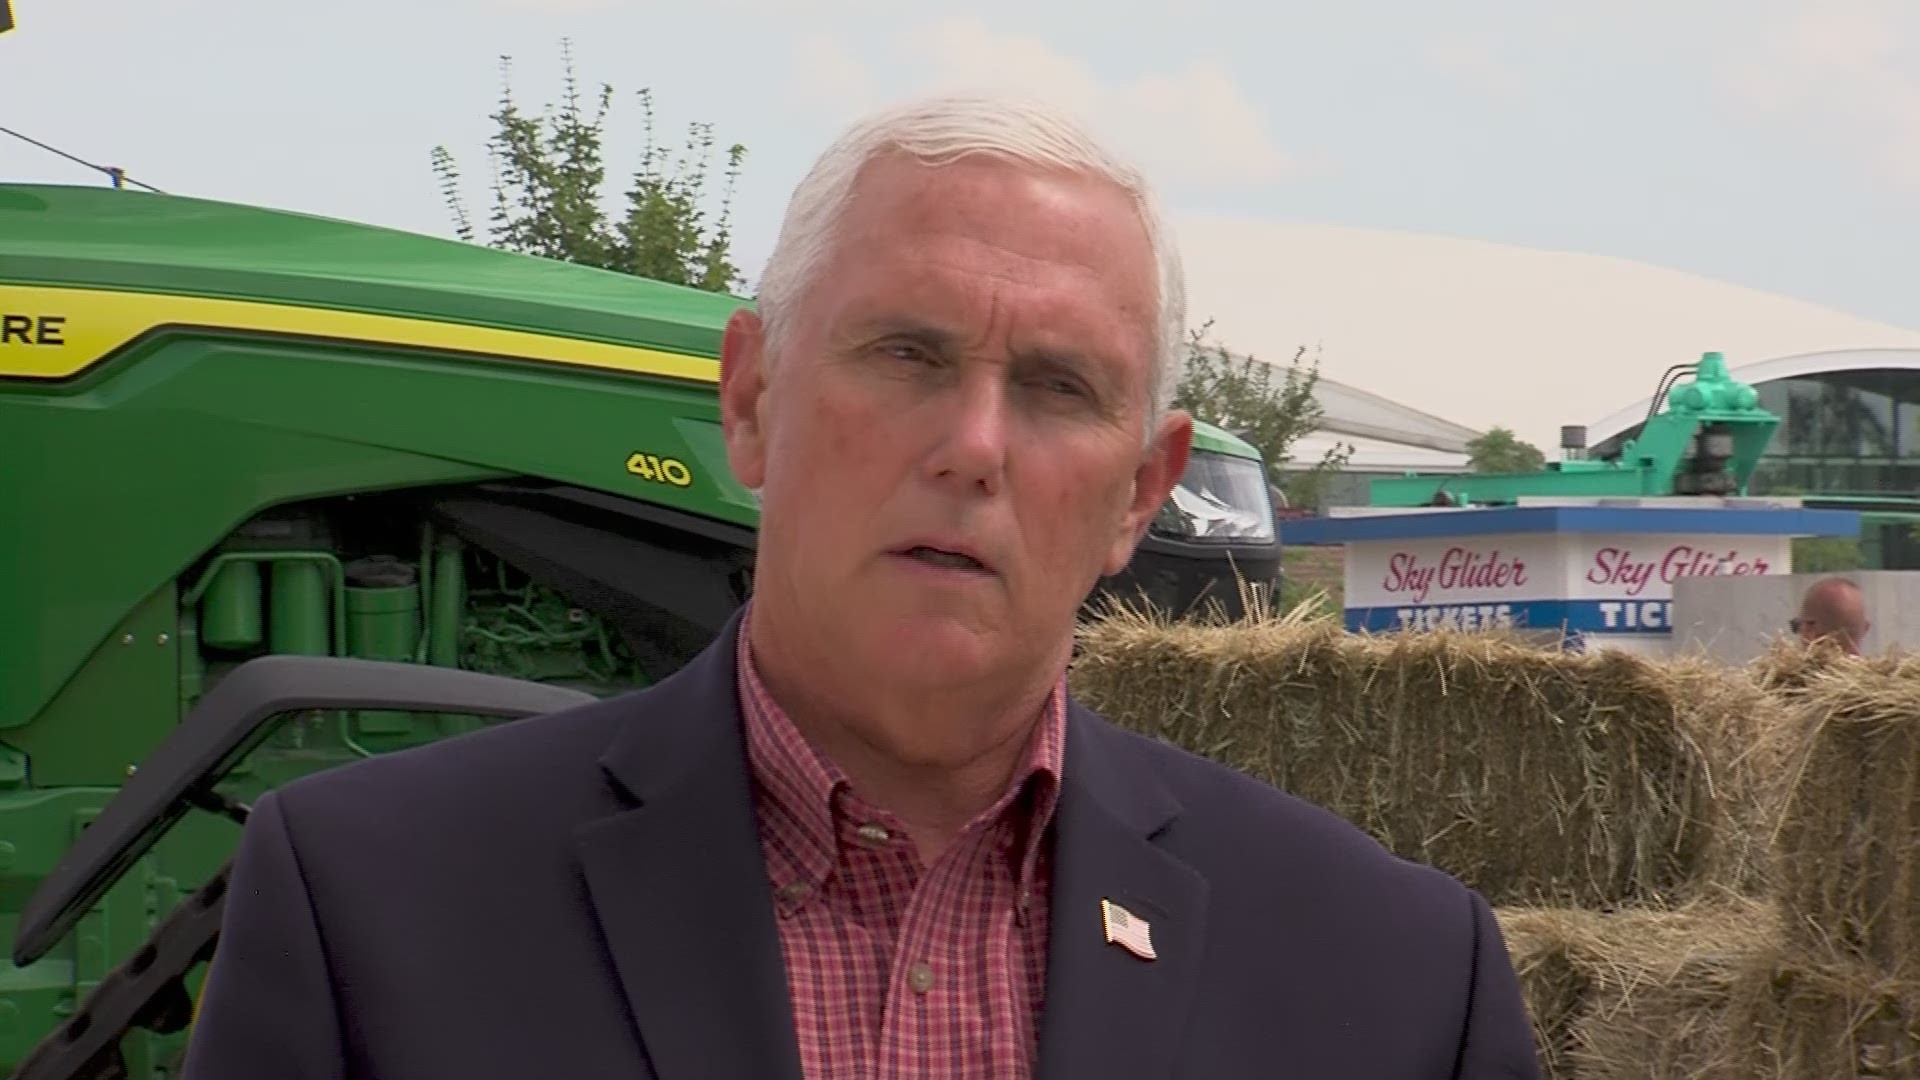 Vice President Mike Pence spoke with Local 5's Rachel Droze, as he visited central Iowa.